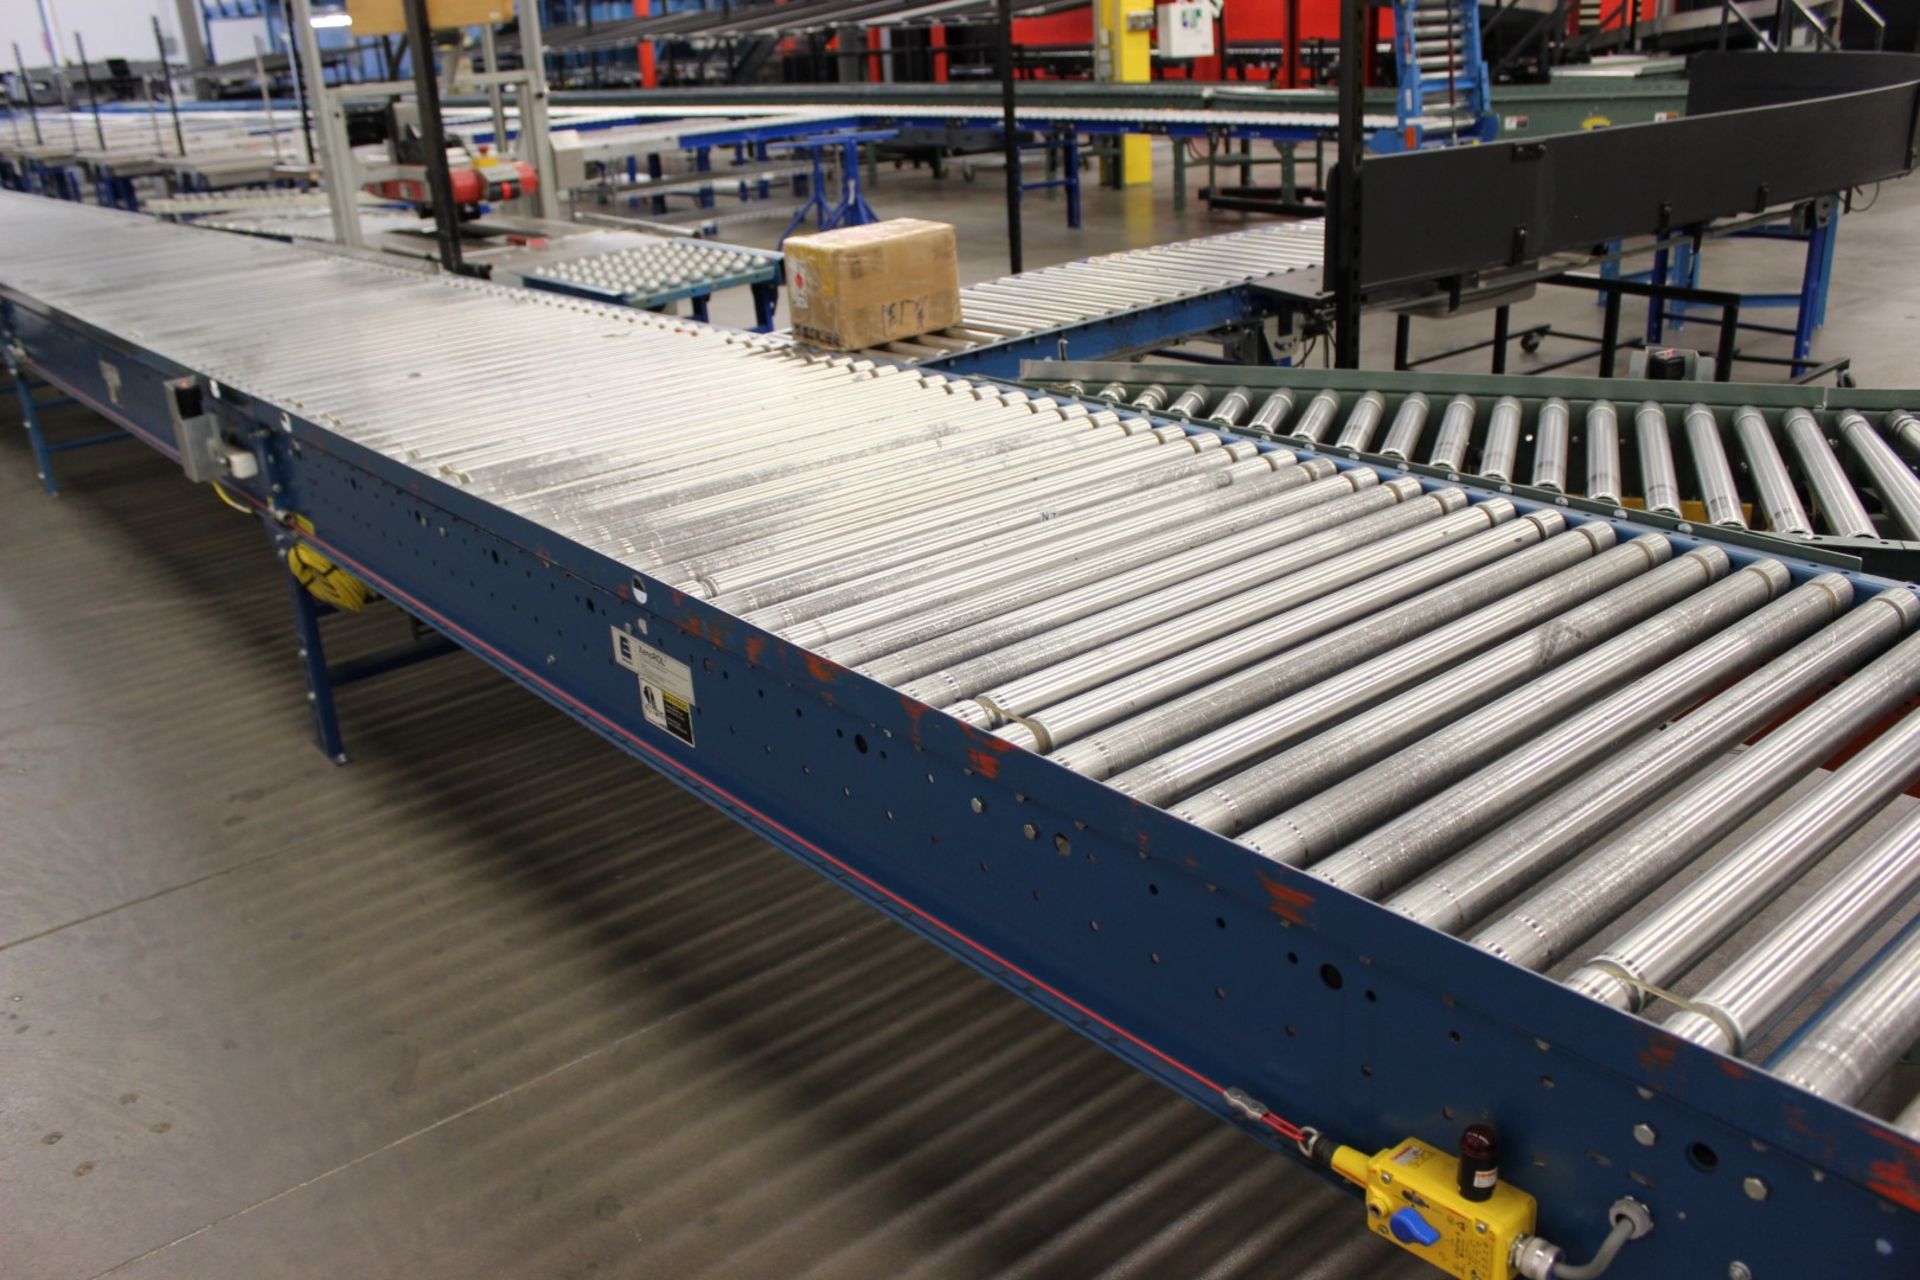 2002 XENOROL XR48 20 FT LONG X 42" WIDE, LINE-SHAFT-DRIVEN LIVE ROLLER CONVEYOR / POWERED CONVEYOR - Image 4 of 8